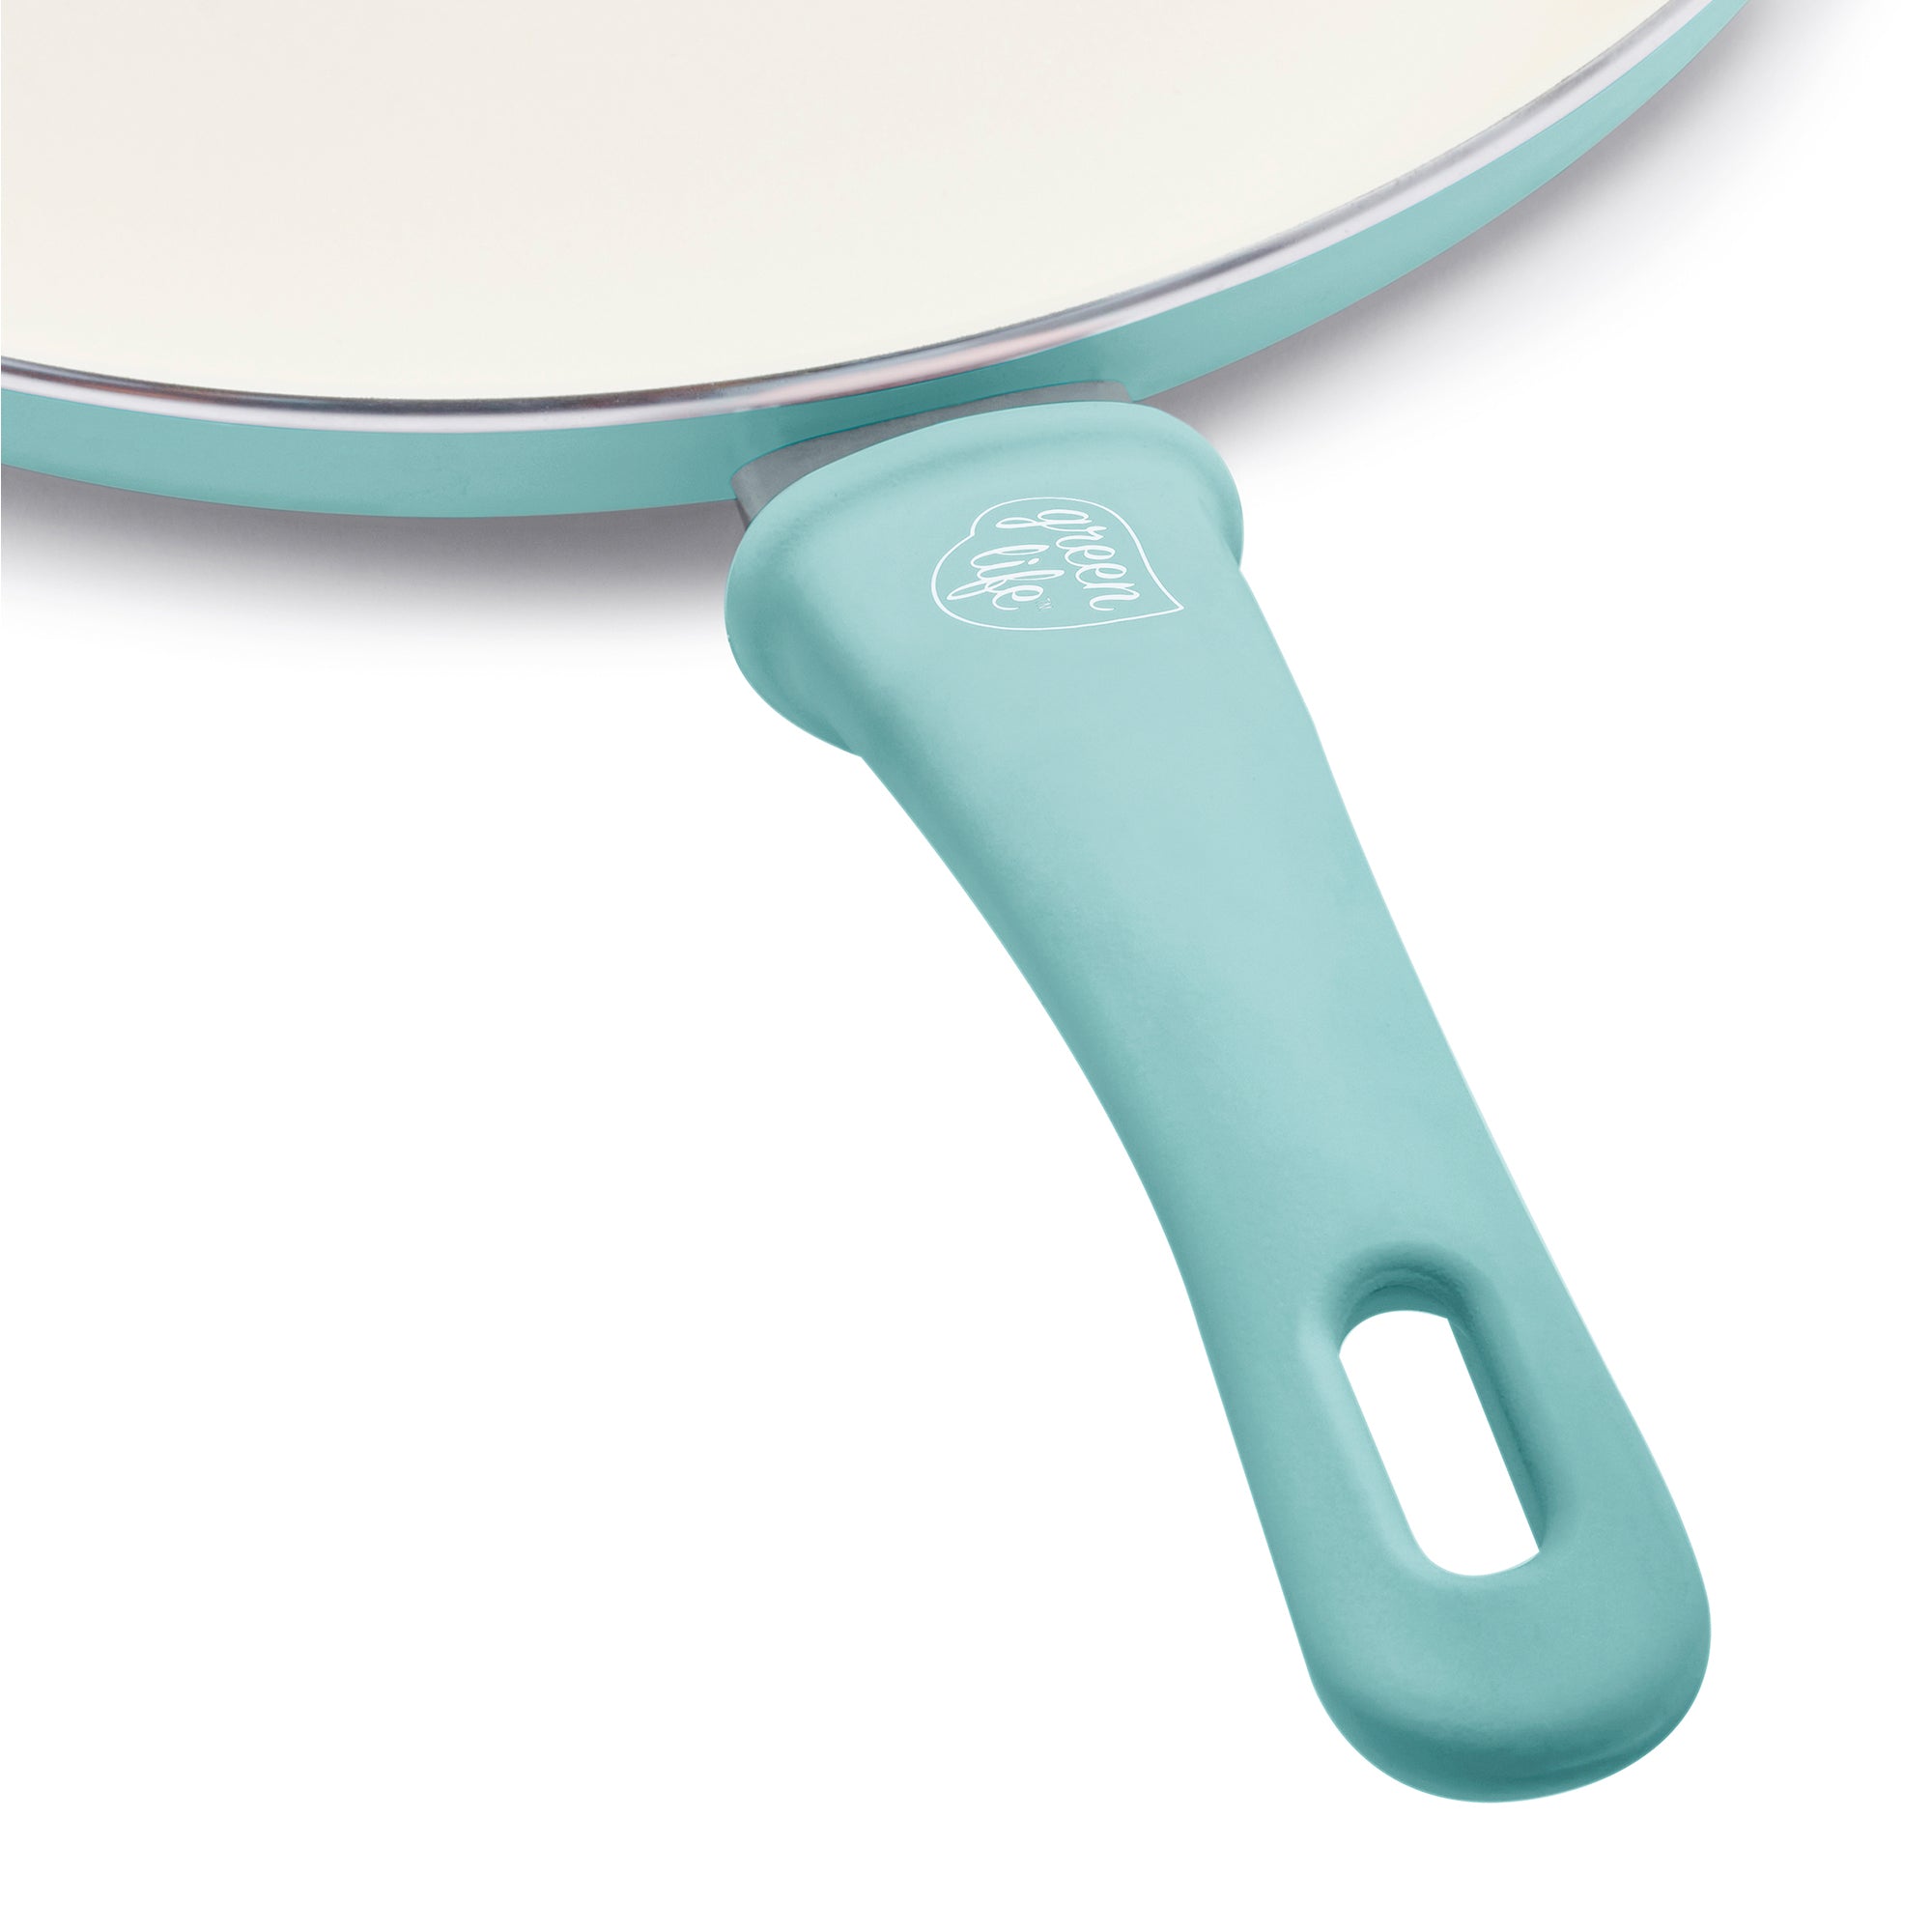 GreenLife Soft Grip 12 Ceramic Non-Stick Open Frypan, Turquoise -  CW000524-002